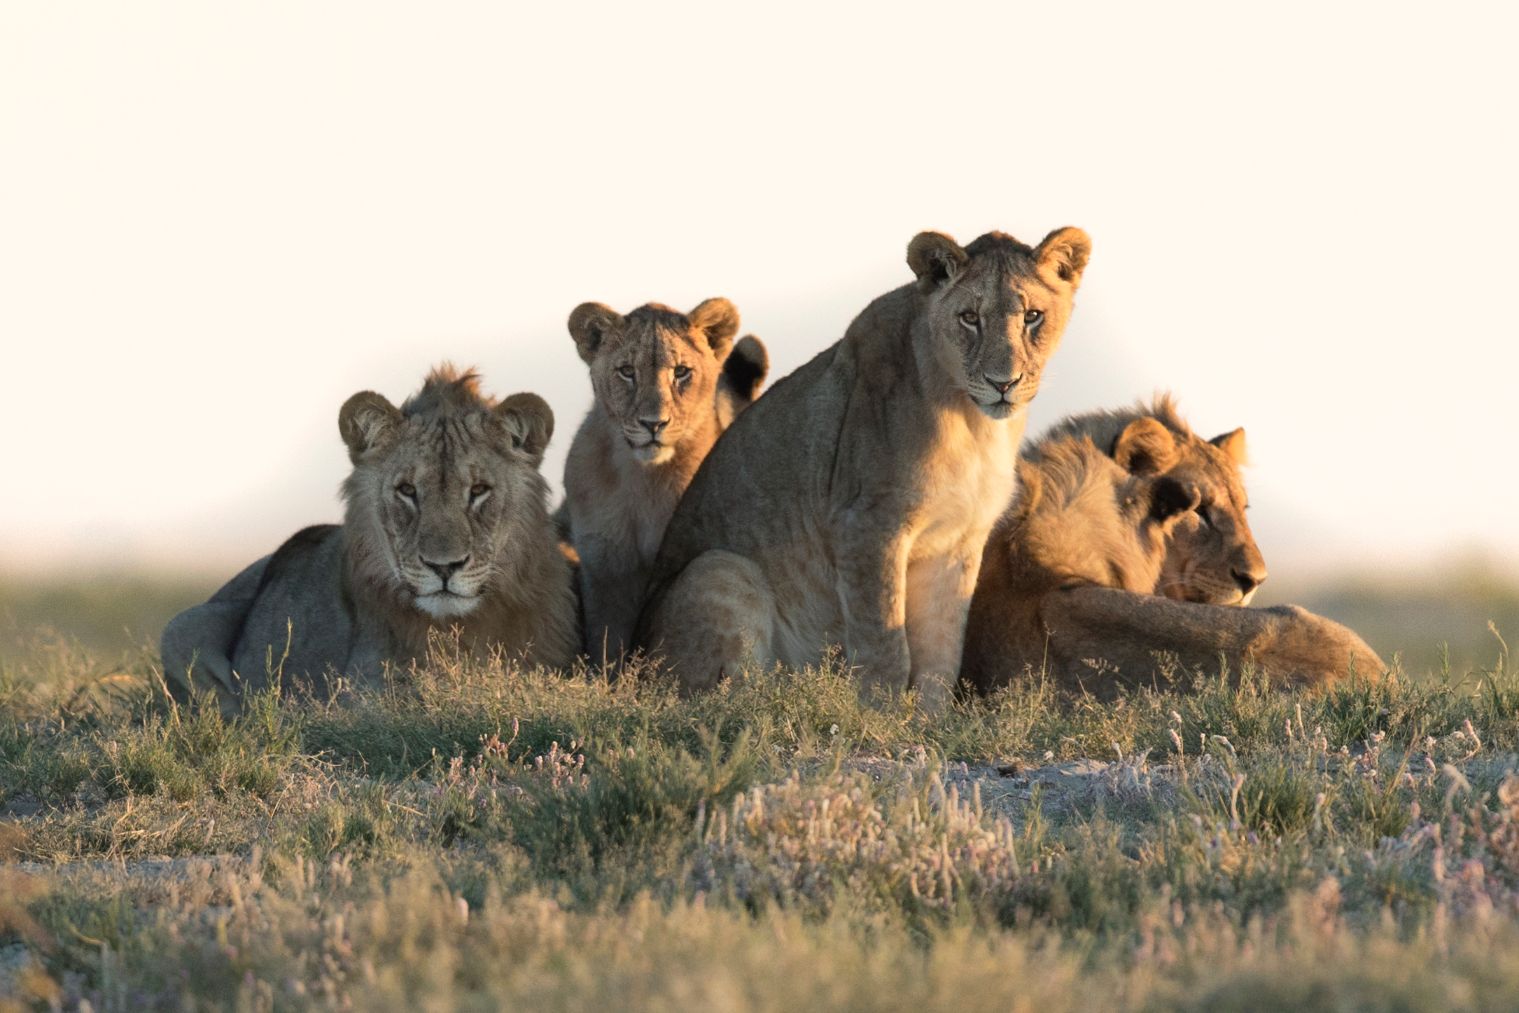 A pride of lions at dawn in Namibia. Photo: Getty Images